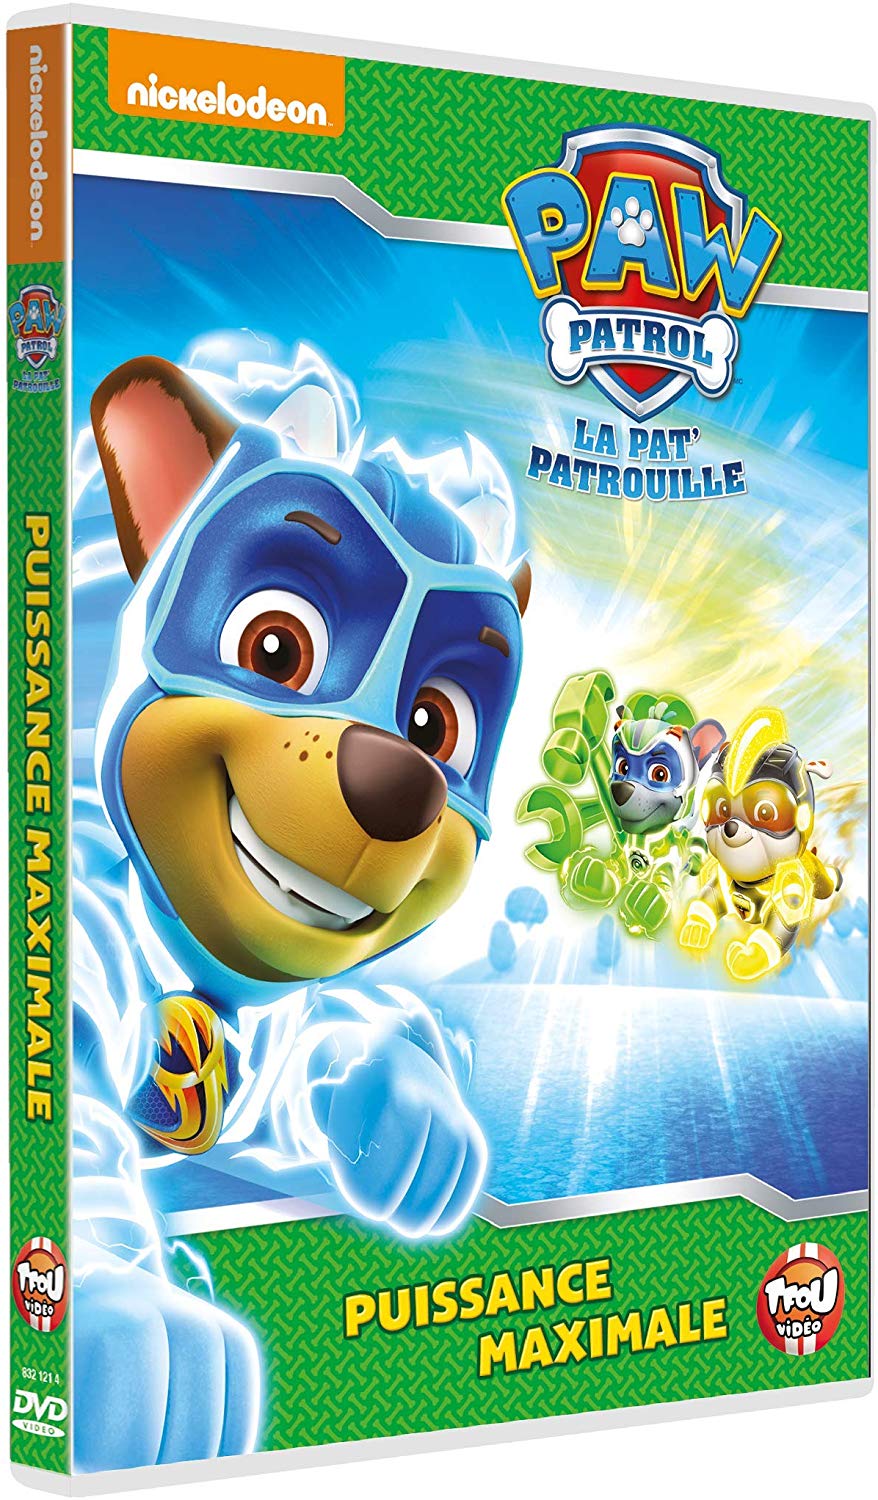 Puissance maximale, PAW Patrol Wiki